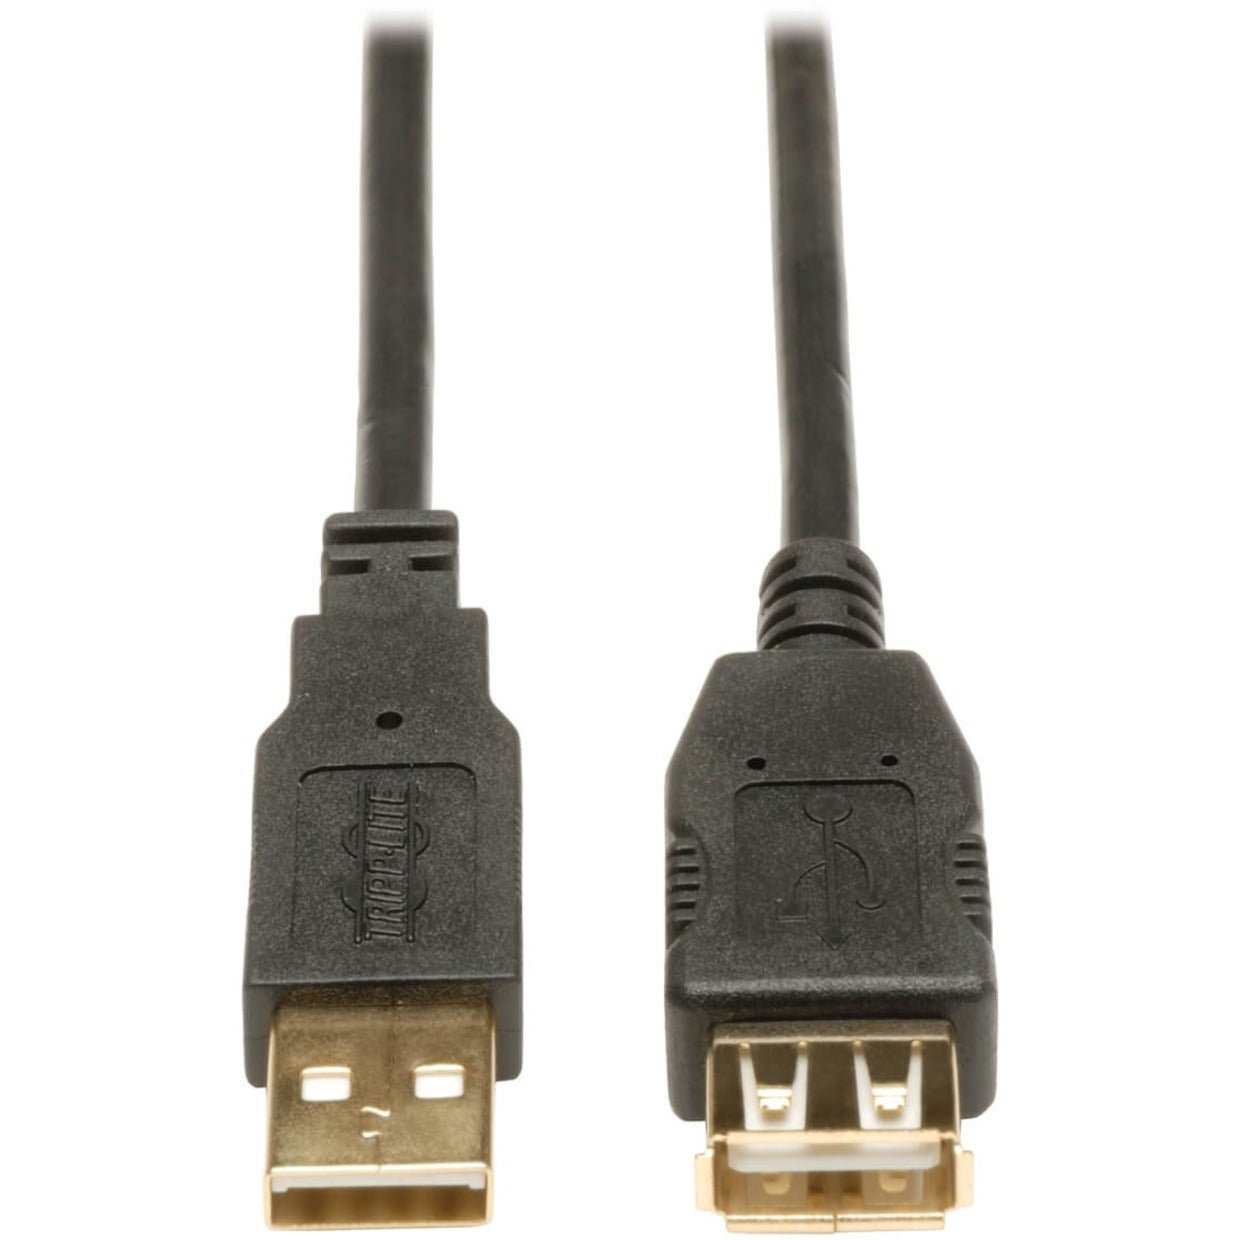 Tripp Lite U024-003 3-ft. USB 2.0 Gold Extension Cable, Data Transfer Cable, Molded, Shielded, Black